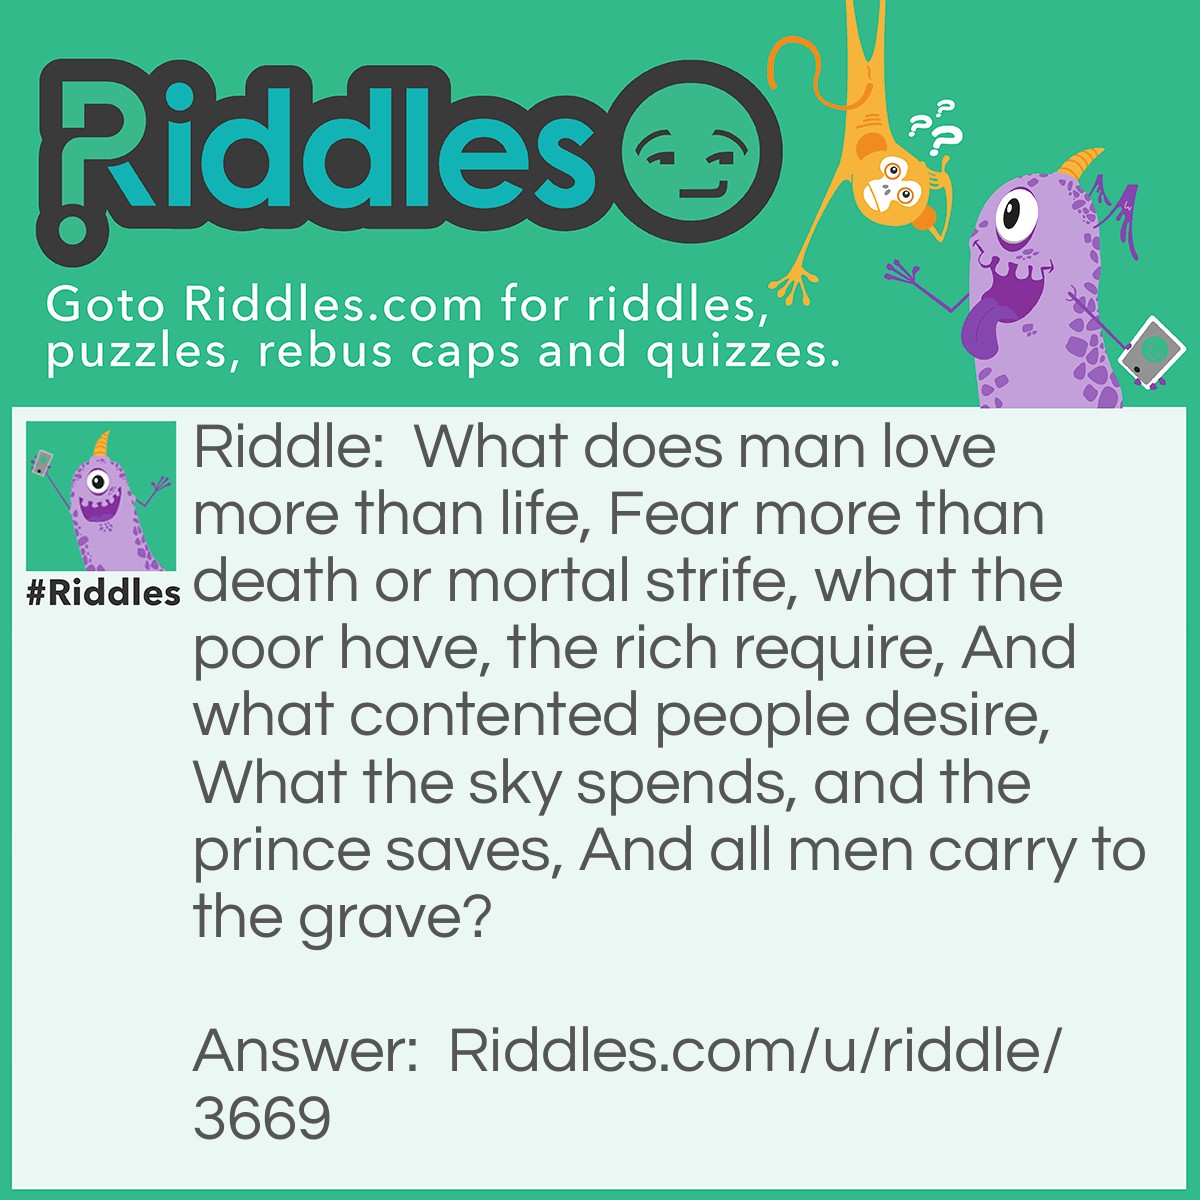 Riddle: What does man love more than life, Fear more than death or mortal strife, what the poor have, the rich require, And what contented people desire, What the sky spends, and the prince saves, And all men carry to the grave? Answer: Nothing.